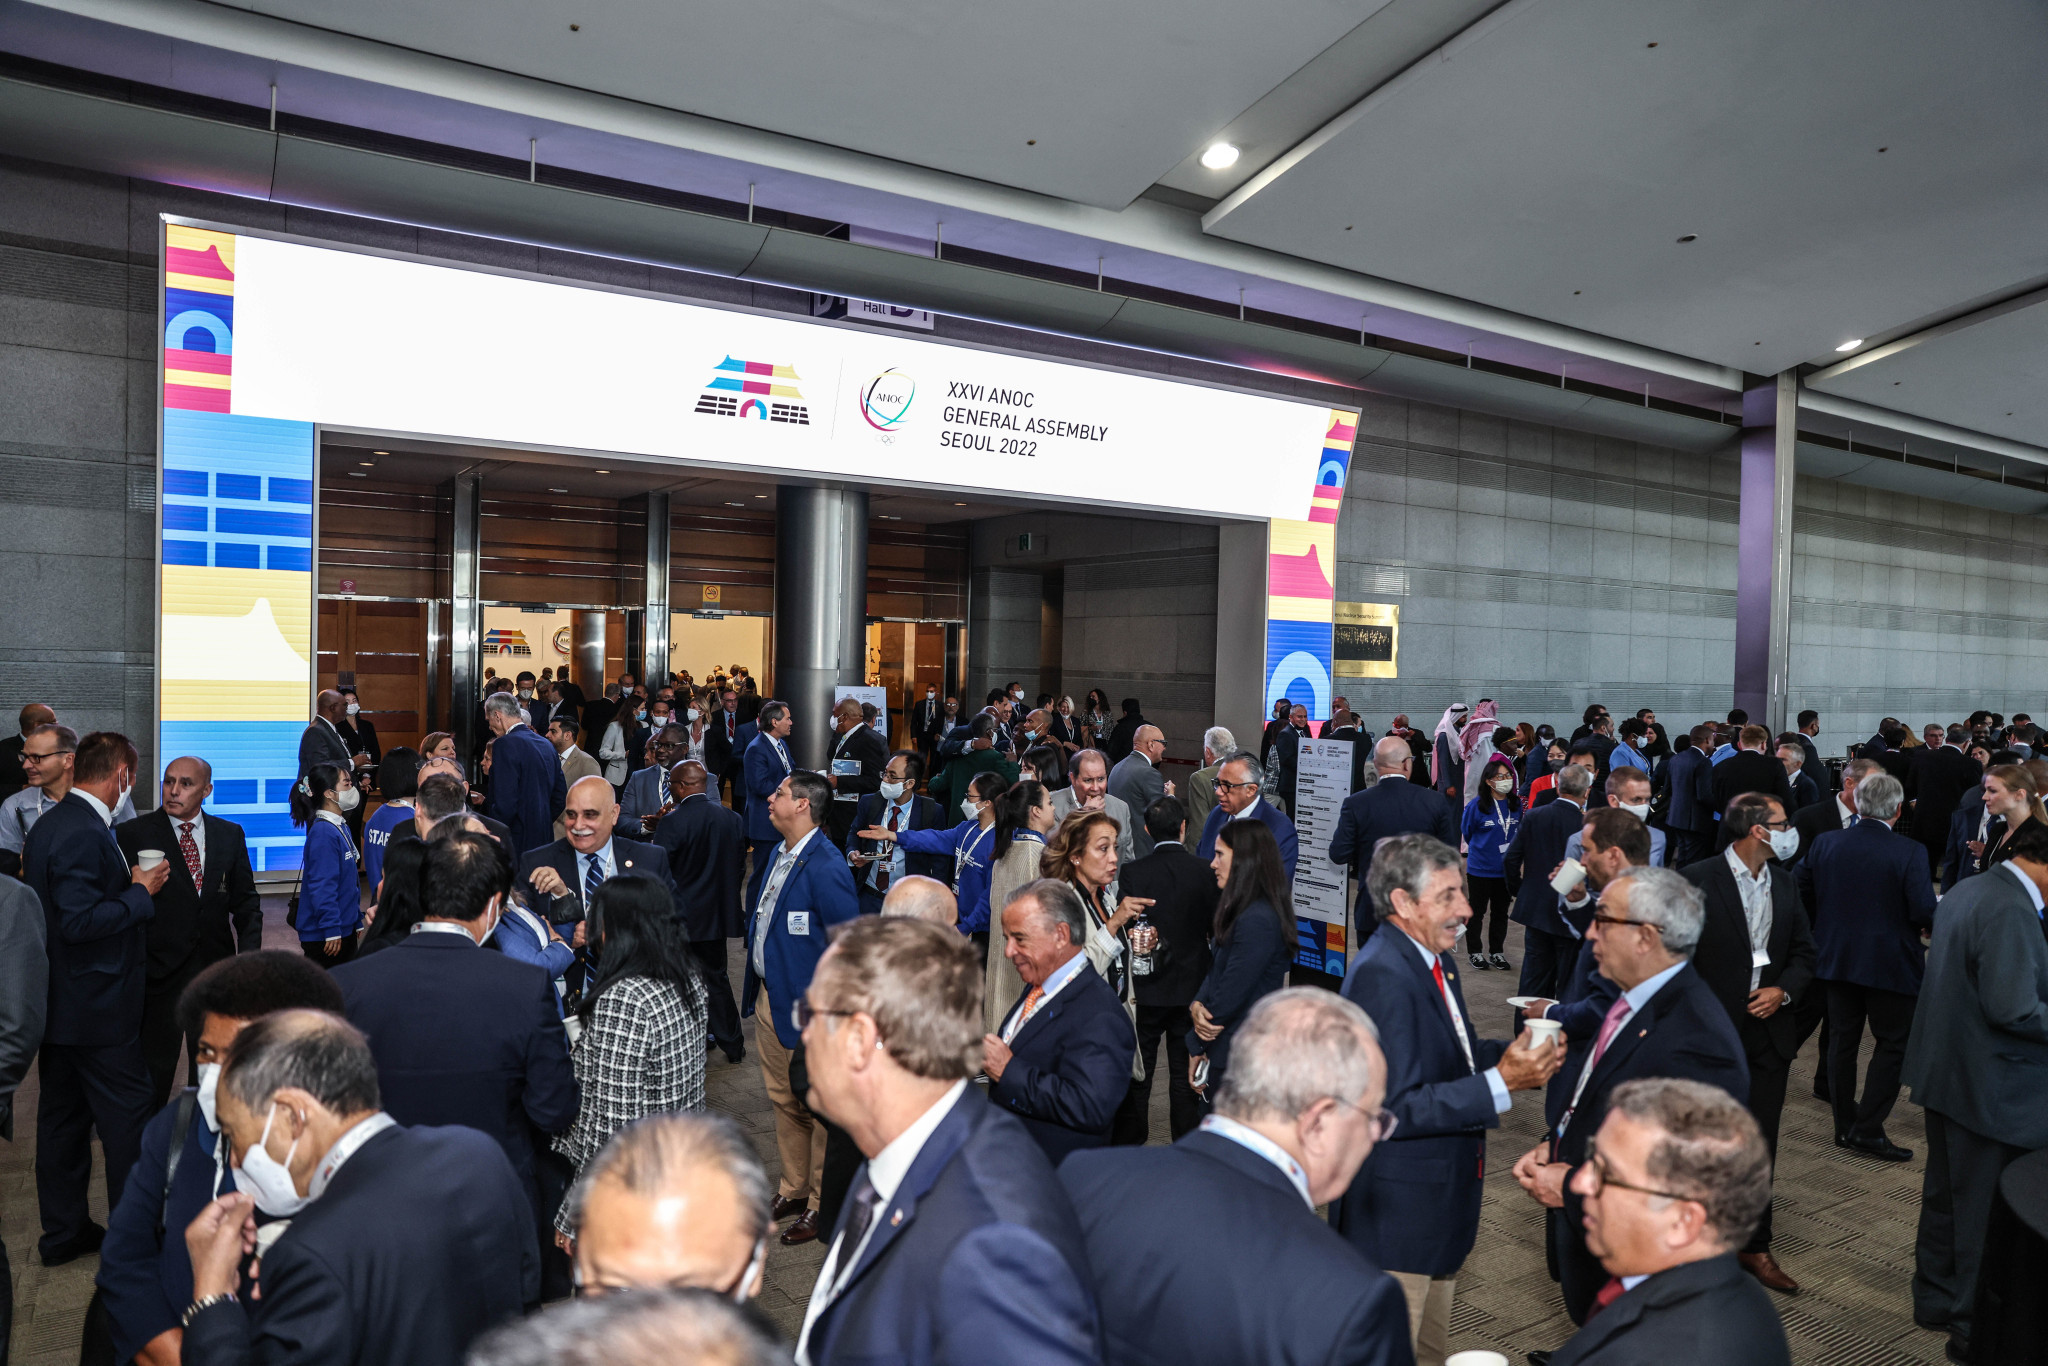 Delegates from around 190 countries gathered for the ANOC General Assembly in Seoul ©ANOC